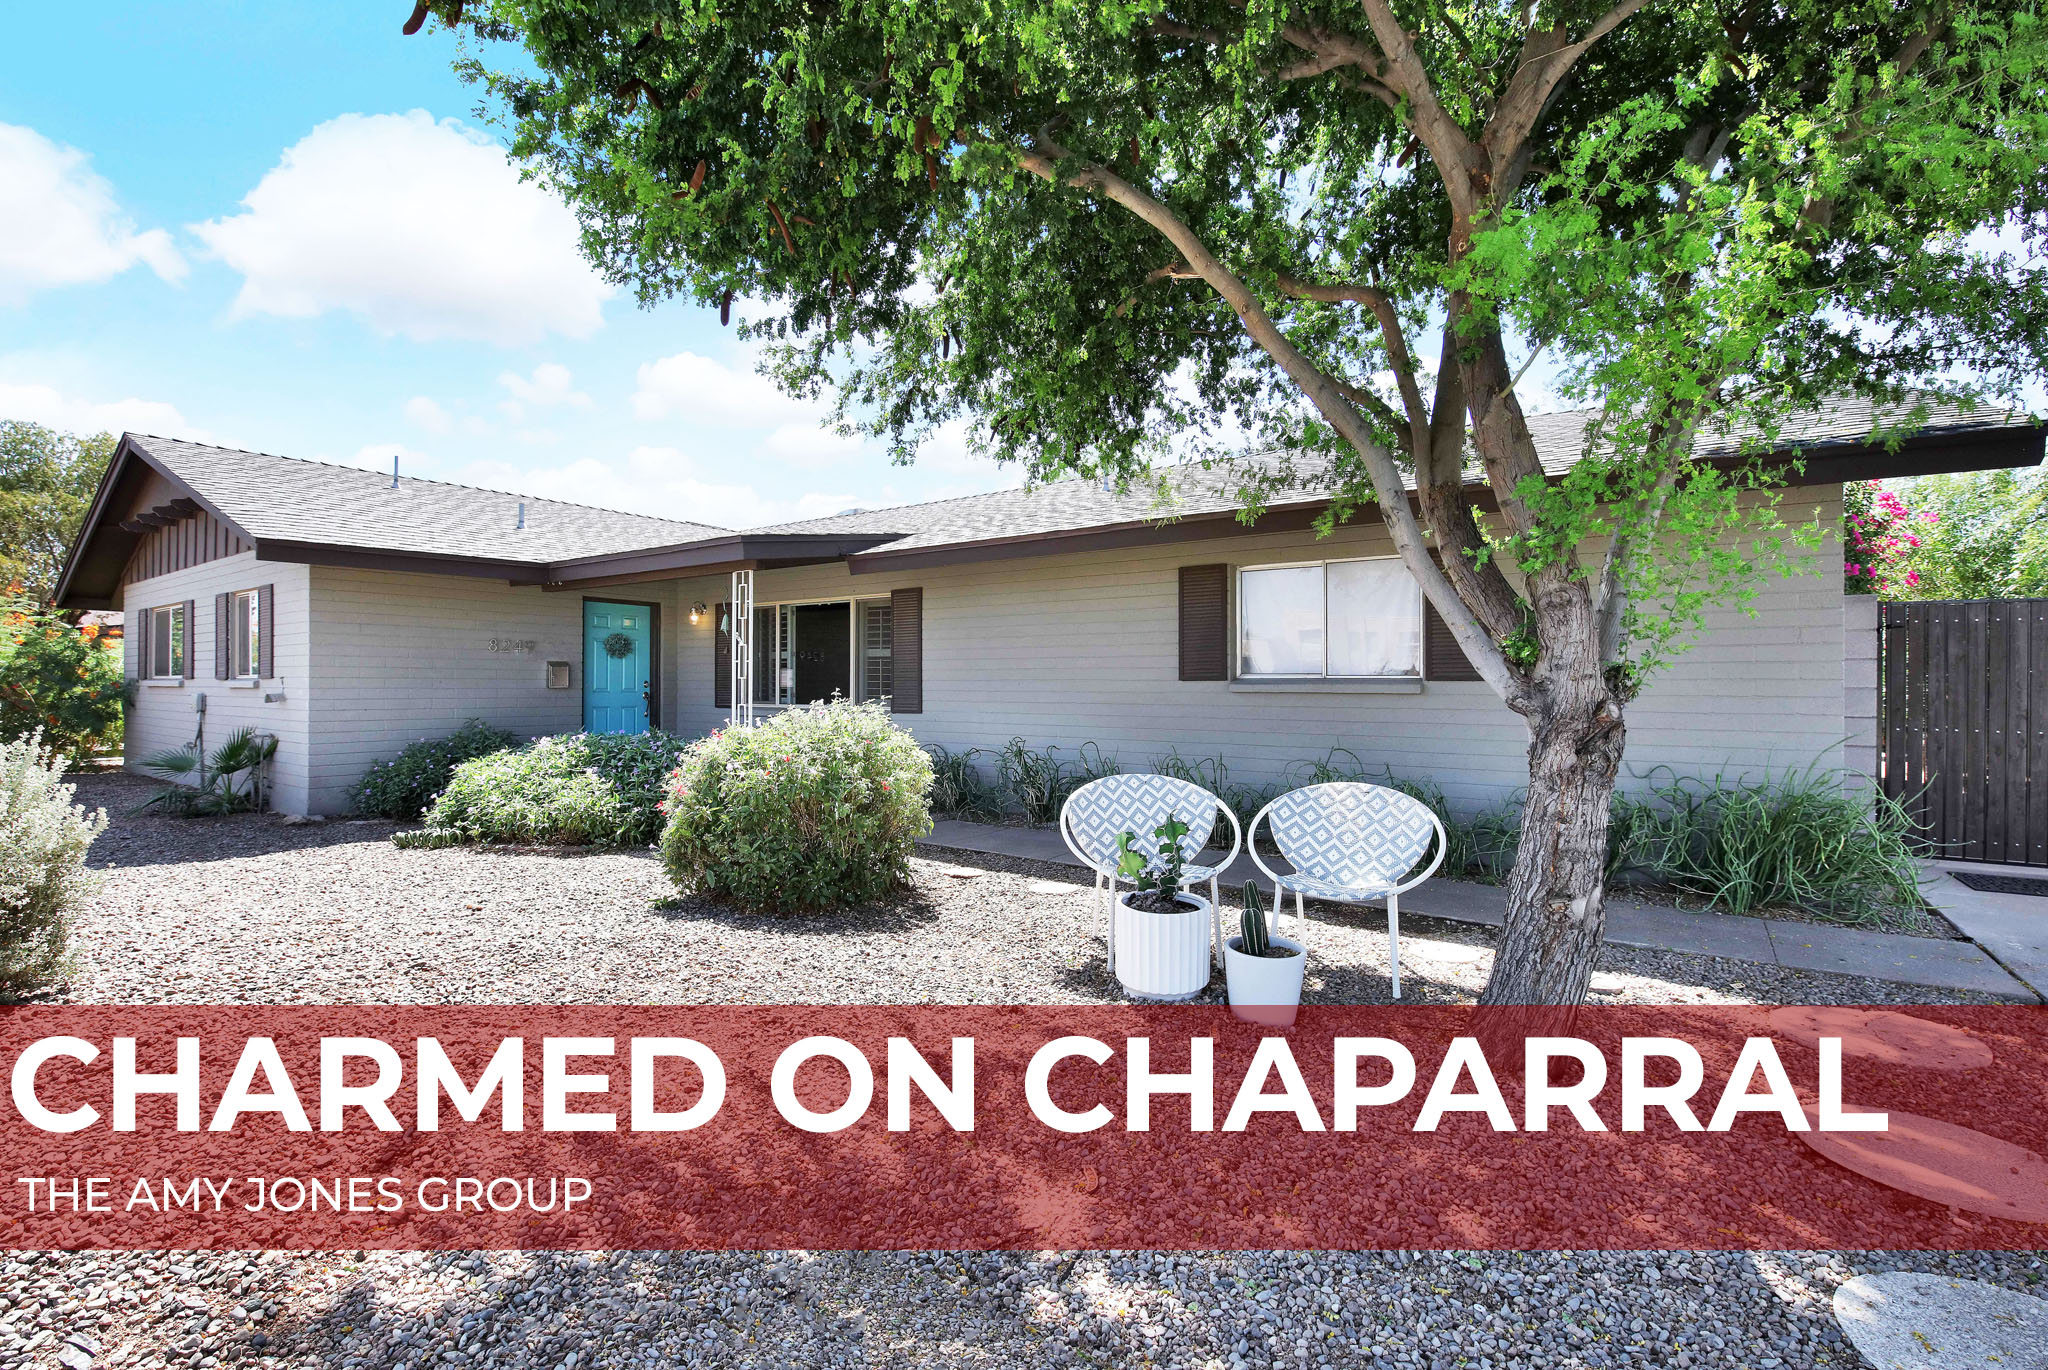 OPEN HOUSE - 8249 E Chaparral Rd - Scottsdale Country | Amy Jones Group